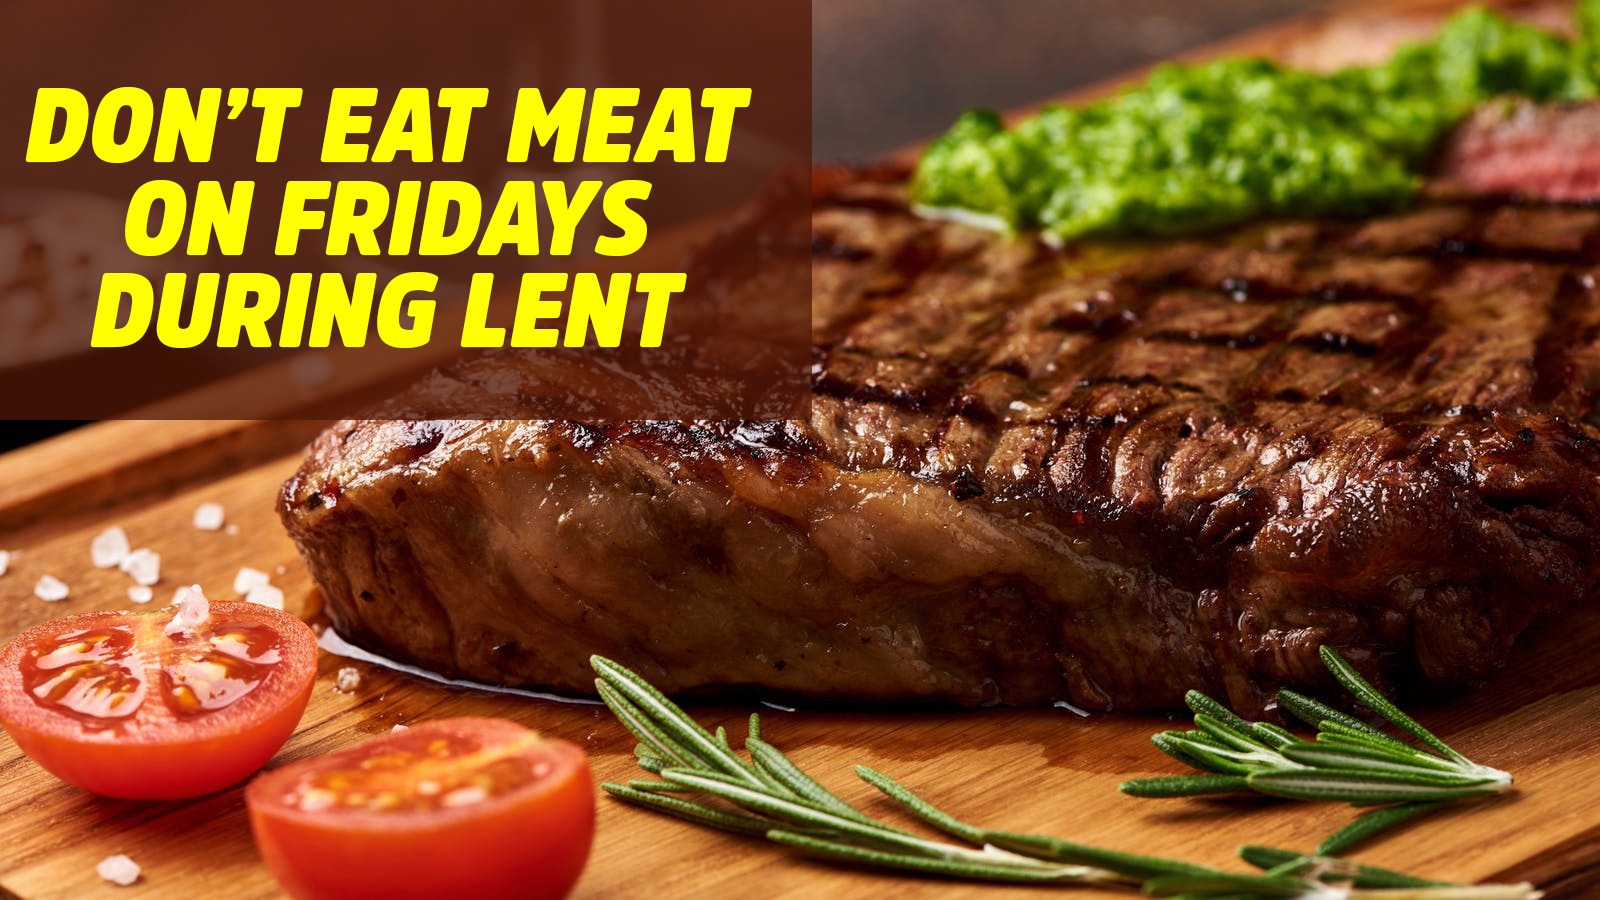 This is the Reason Why You Should Not Eat Meat on Fridays During Lent as a Catholic